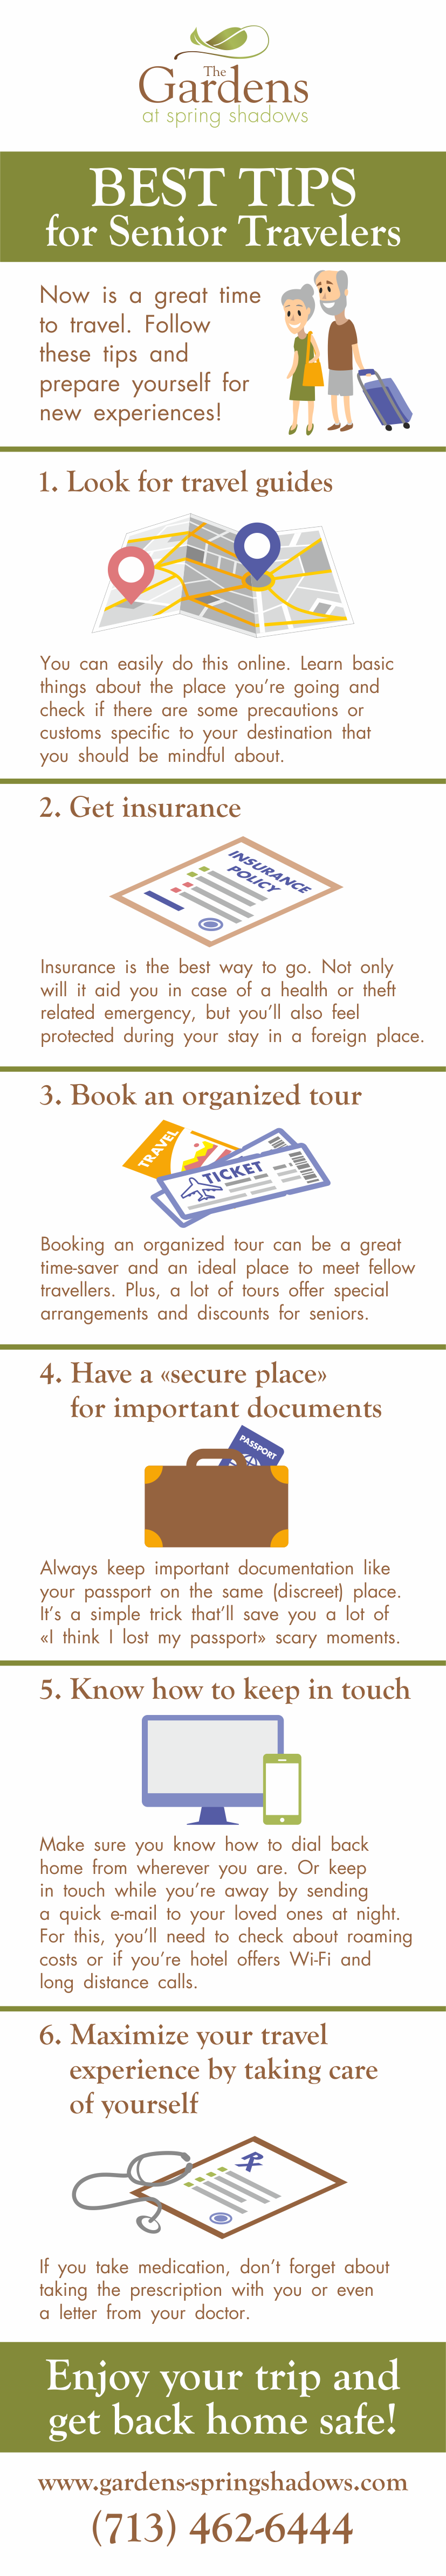 How to Have the Best Holidays: Tips for Senior Travelers - Infographic